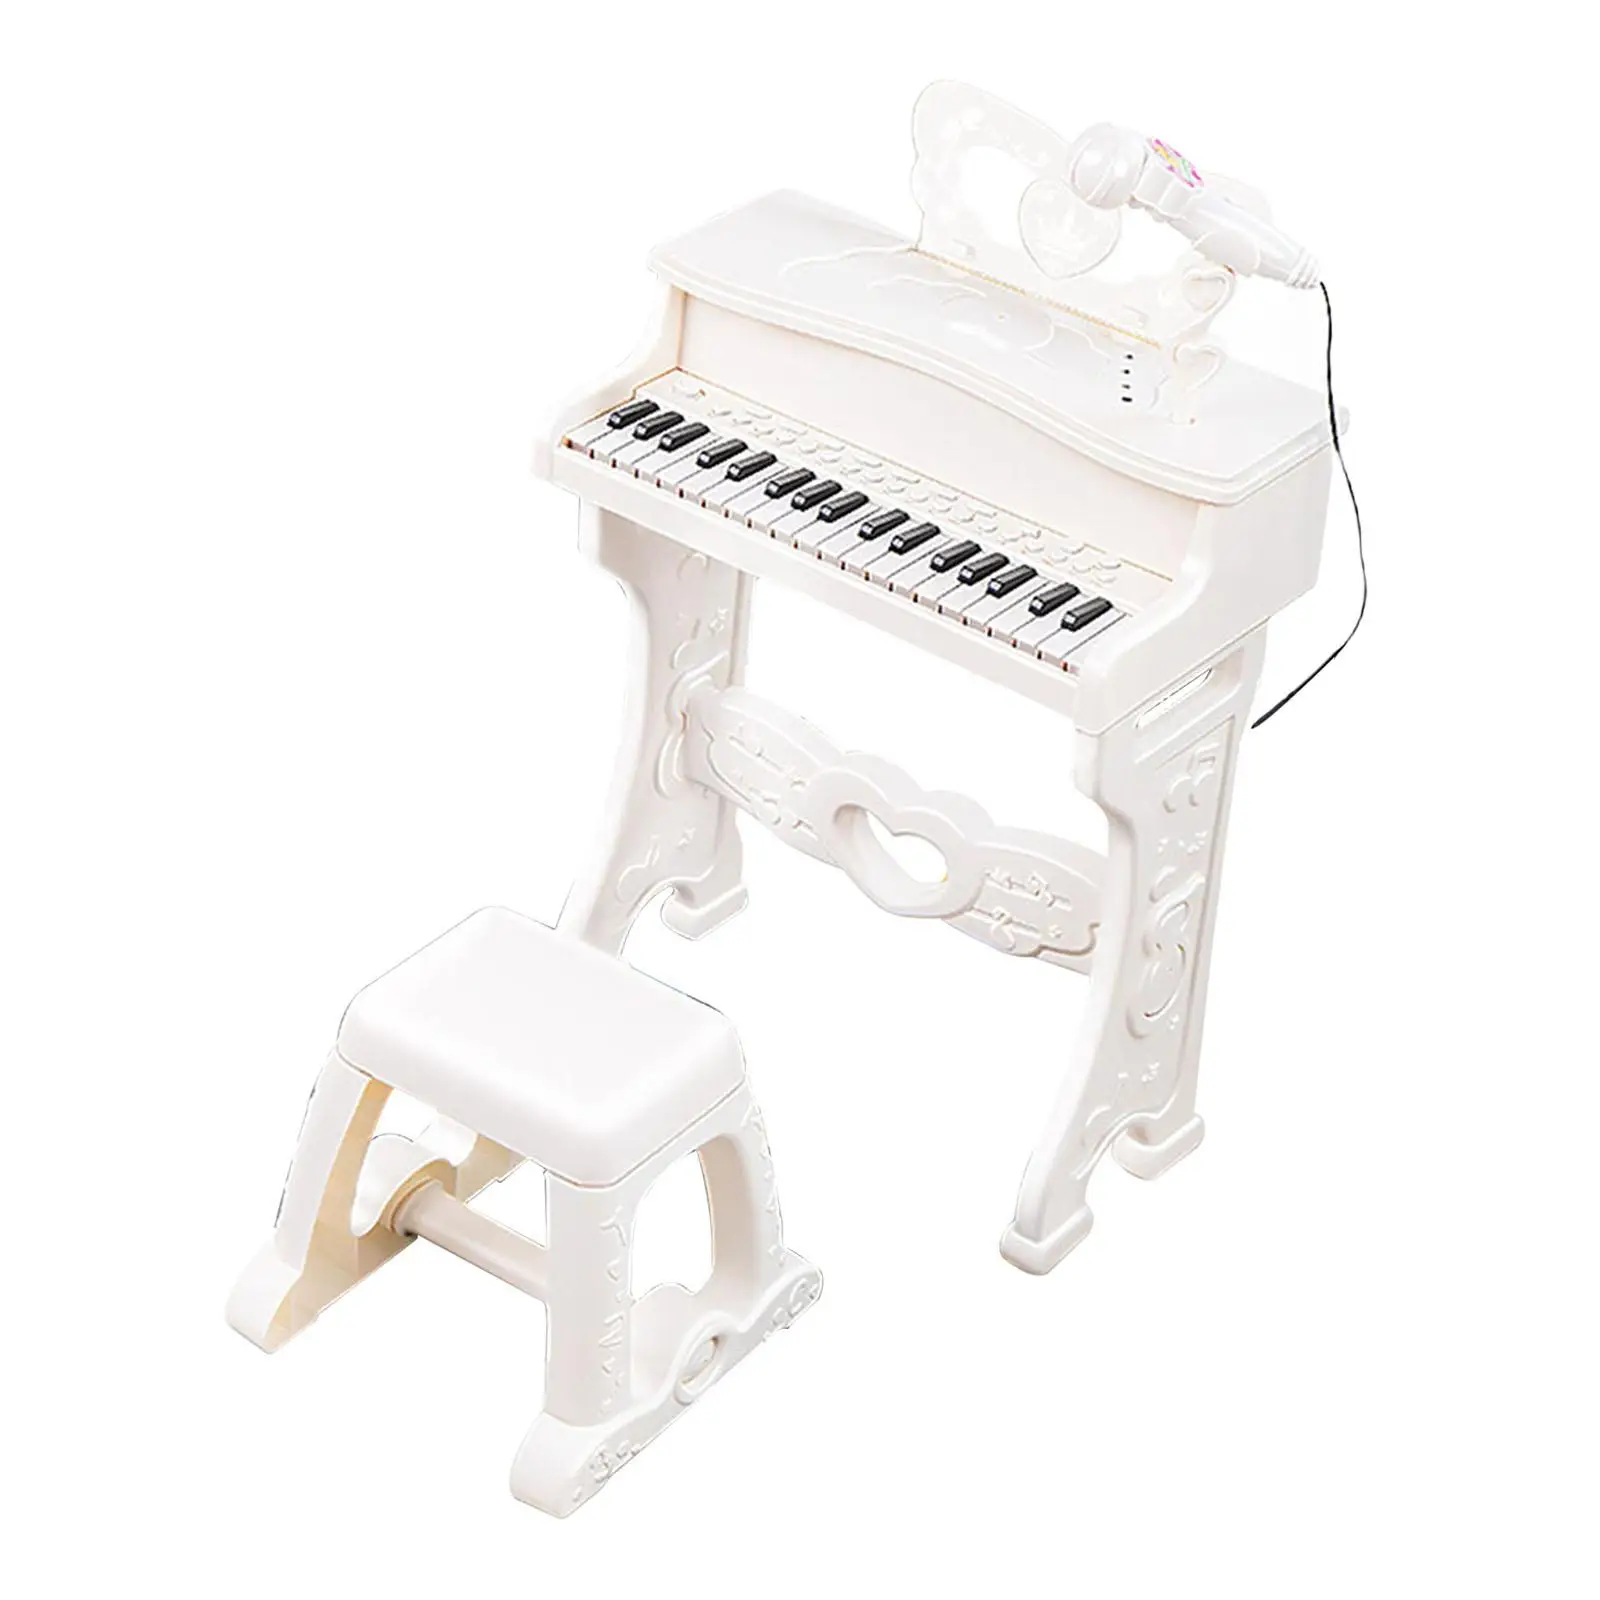 Keyboard with Microphone Educational Toy 37 Key Electronic Piano for Children